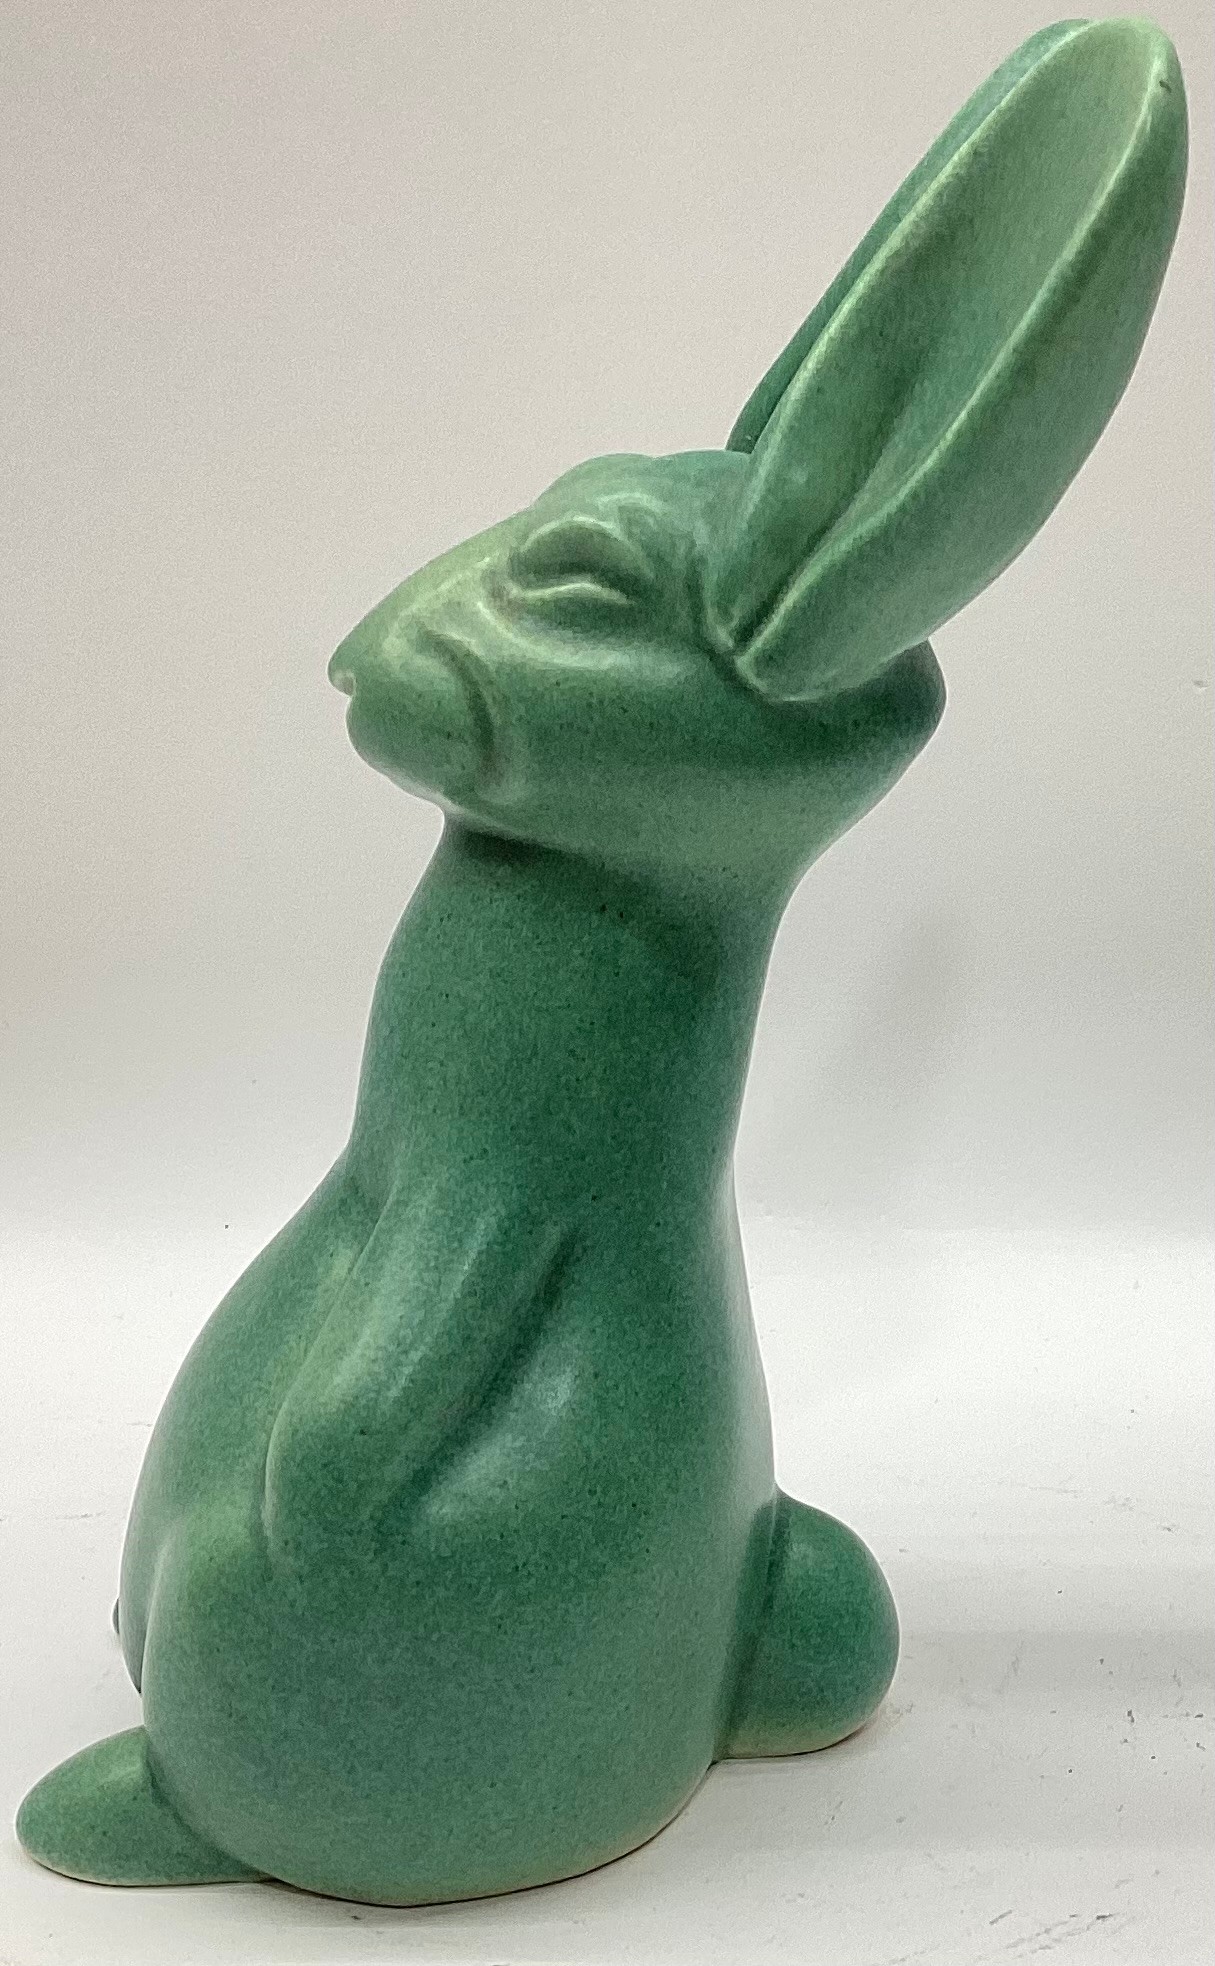 Poole Pottery large well fed rabbit/hare size 3, ear damage 5.8" high. - Image 2 of 4